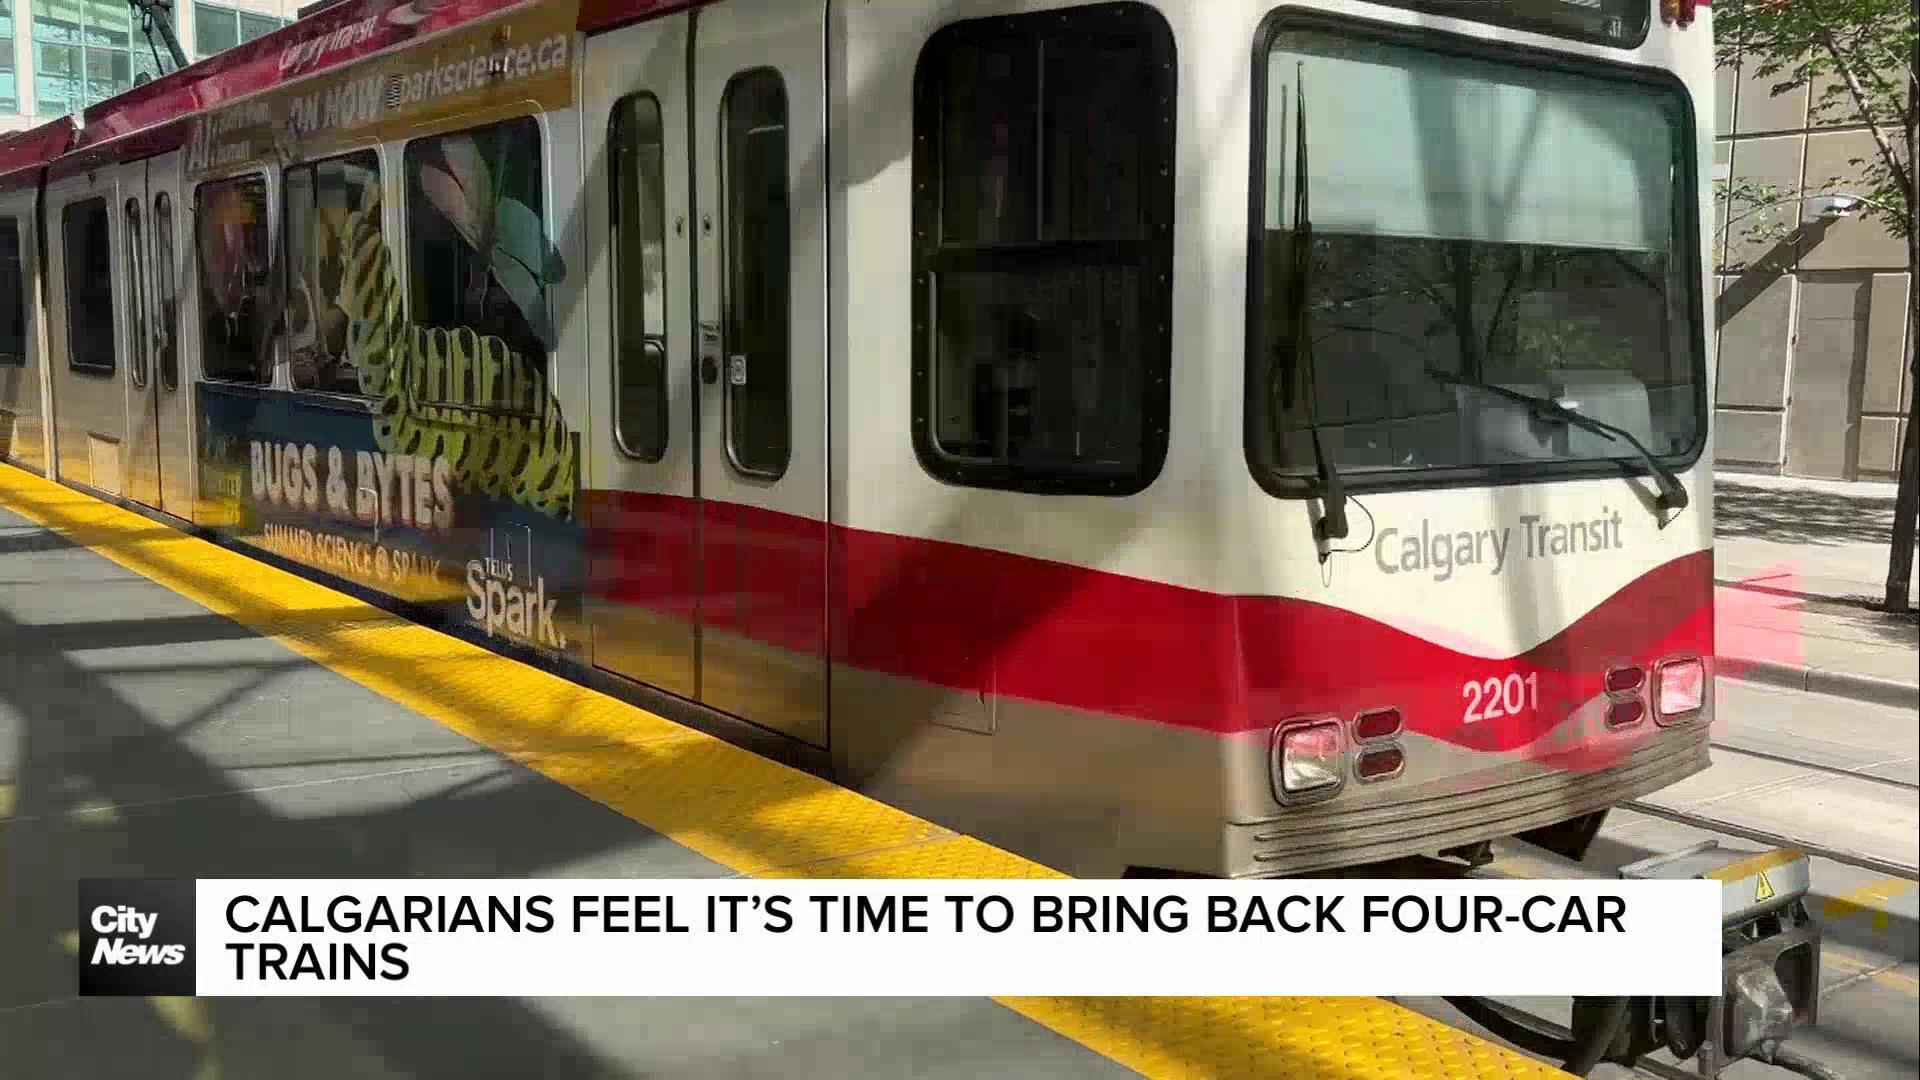 Calgarians feel it's time to bring back four-car CTrains